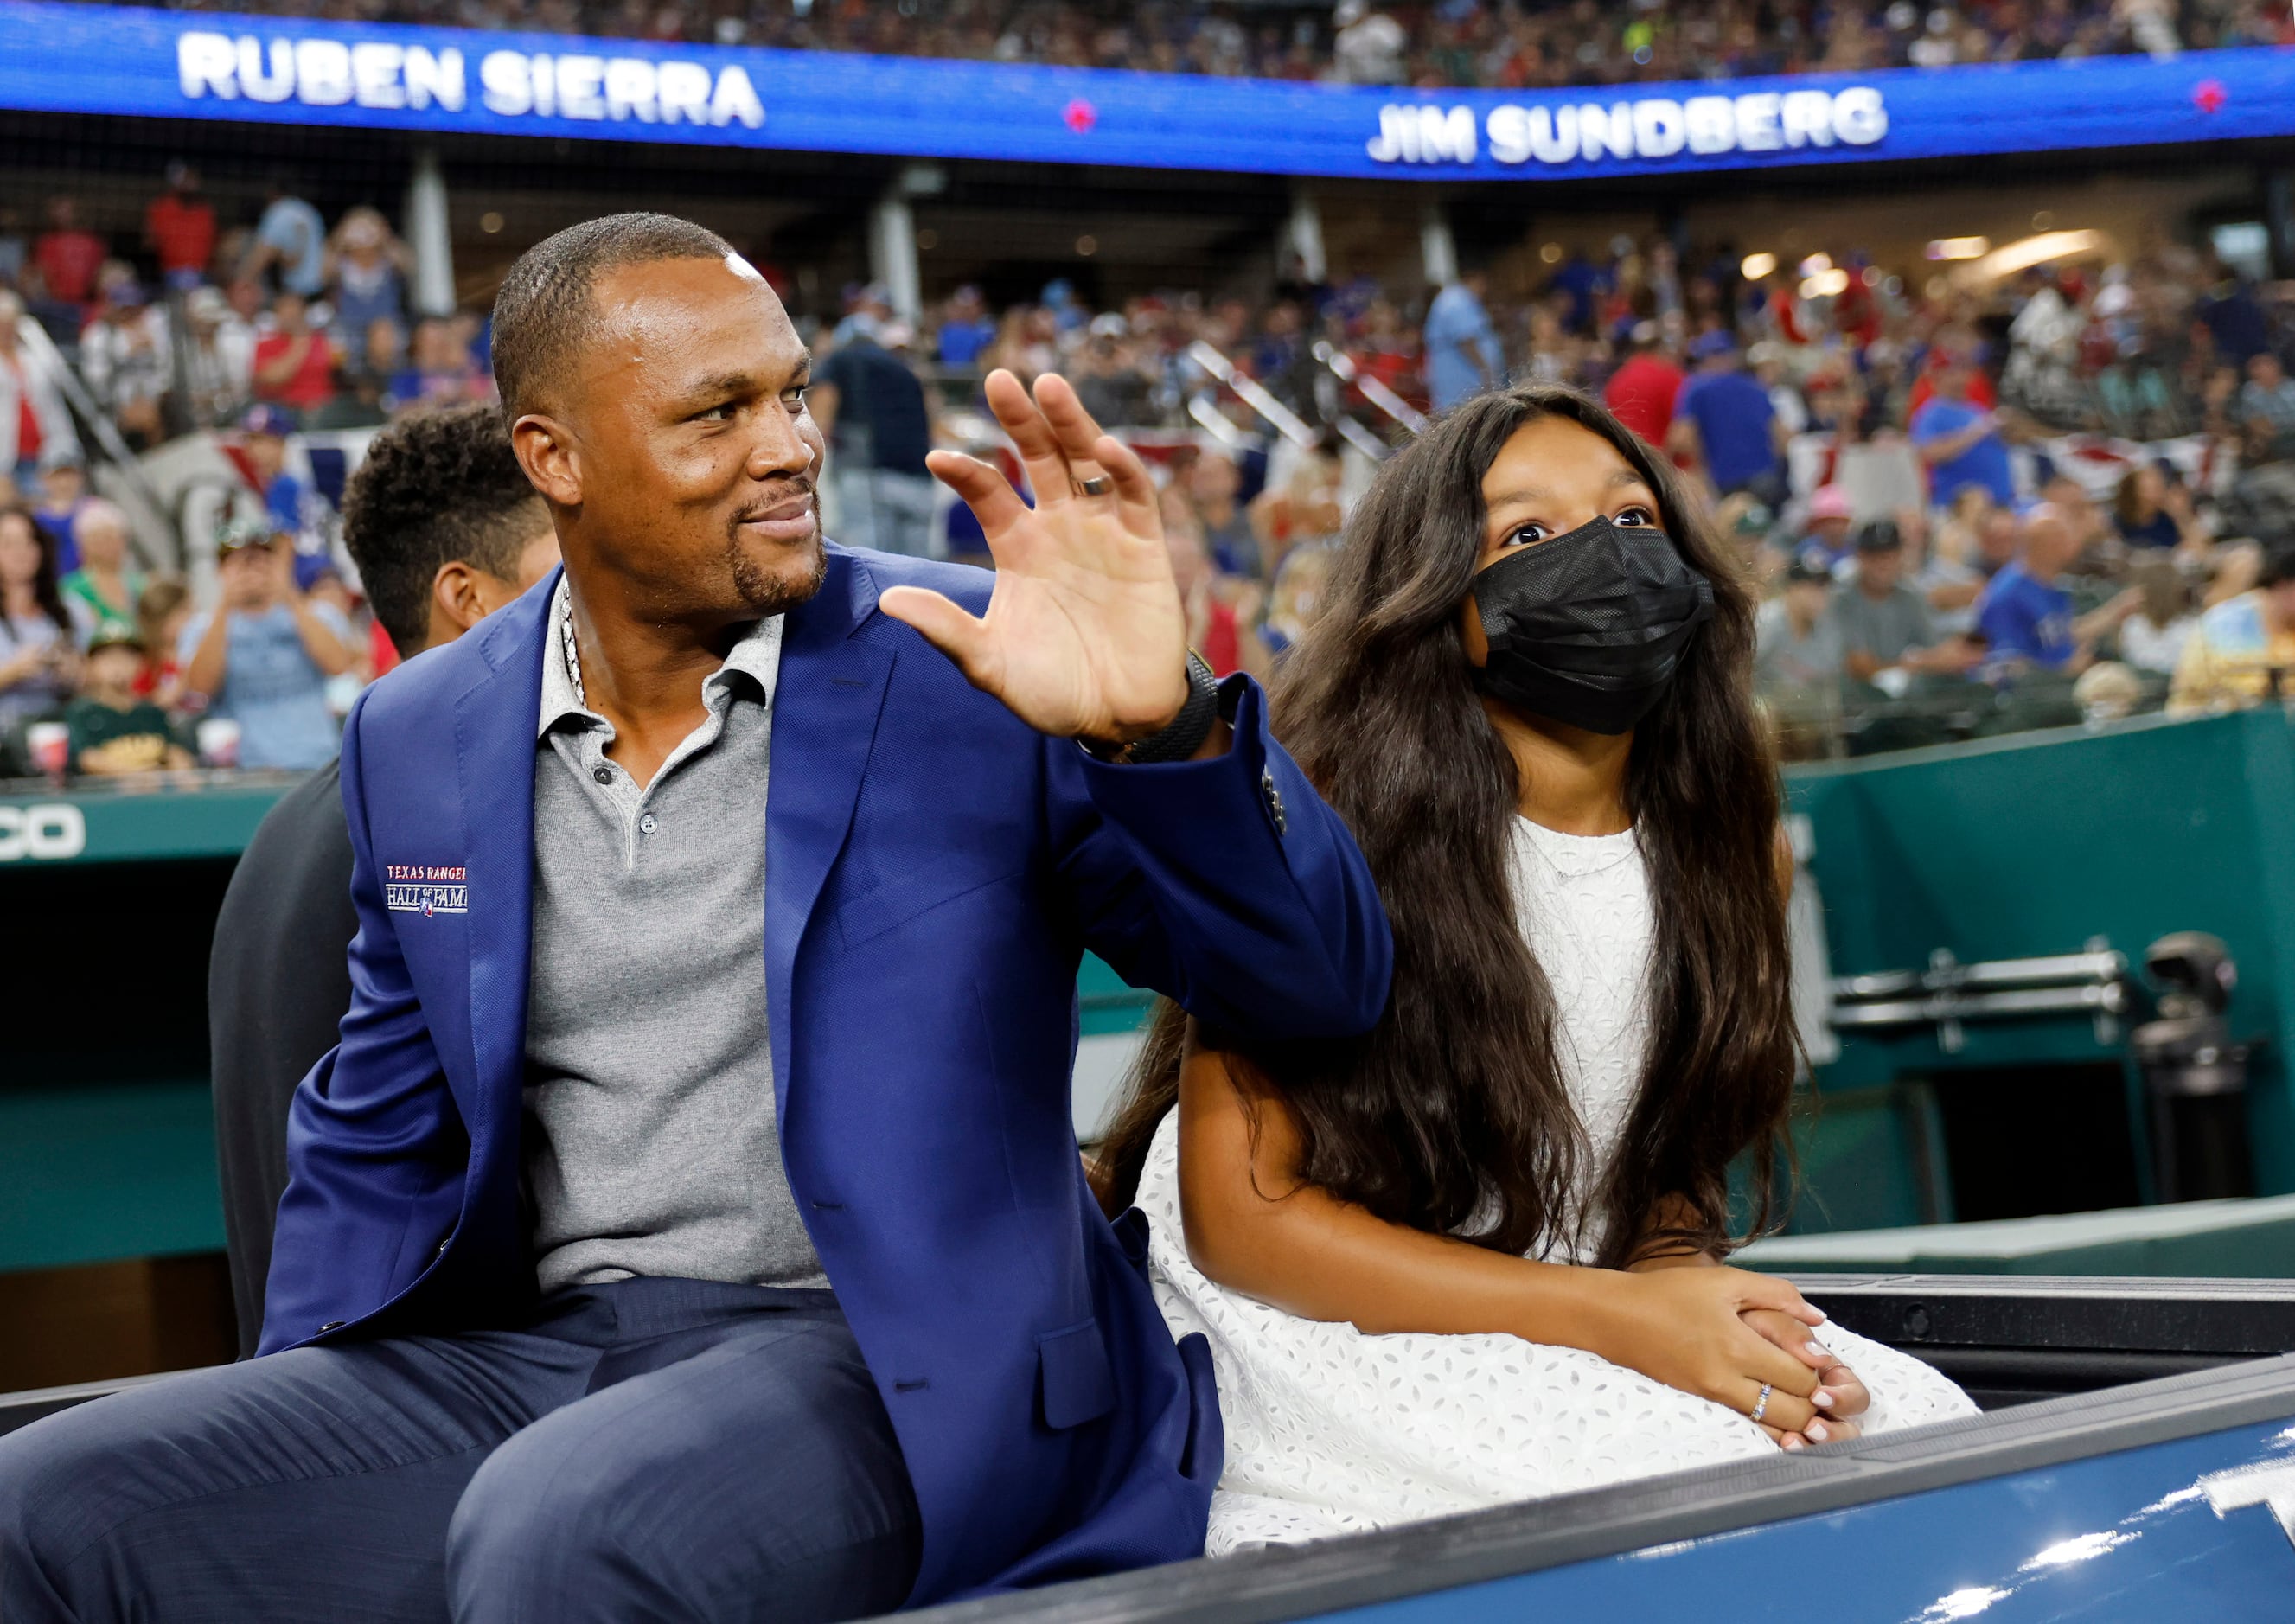 Adrian Beltre, PA announcer Chuck Morgan inducted into Rangers